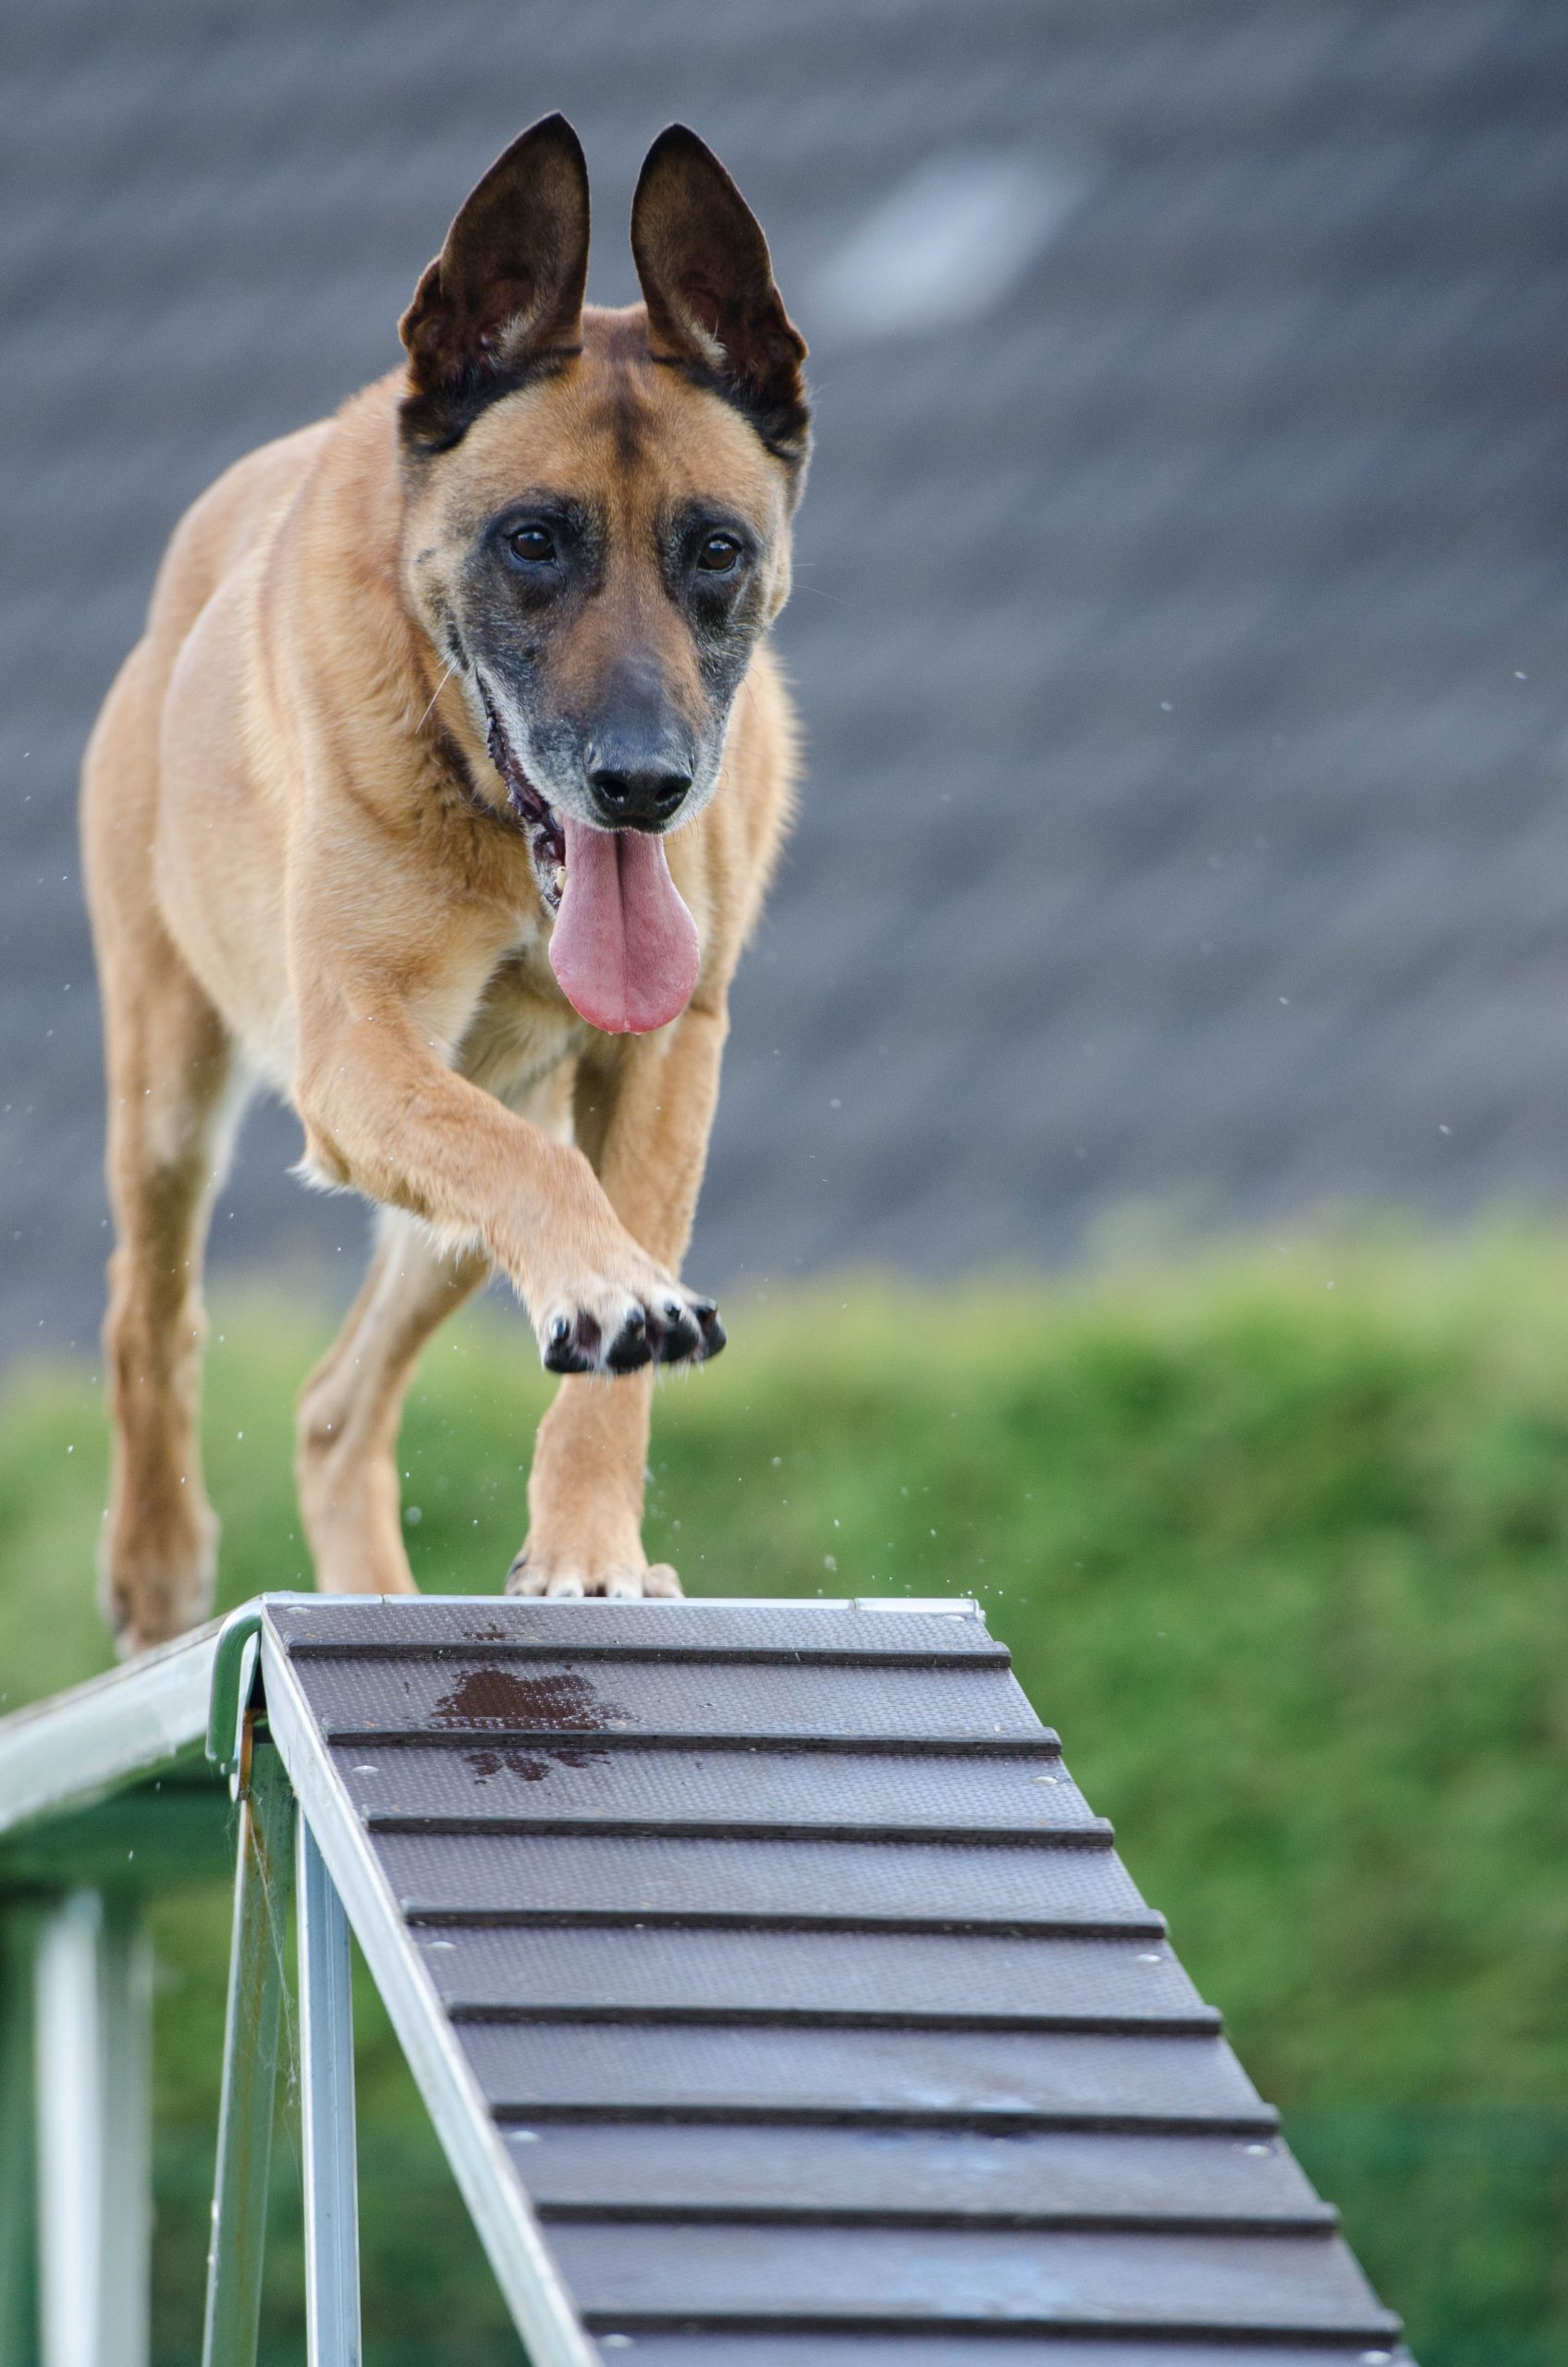 Working breeds like German Shepherds need LOTS of training, activity, and mental stimulation. They are highly capable of mastering obstacle courses, and enjoy the challenge.